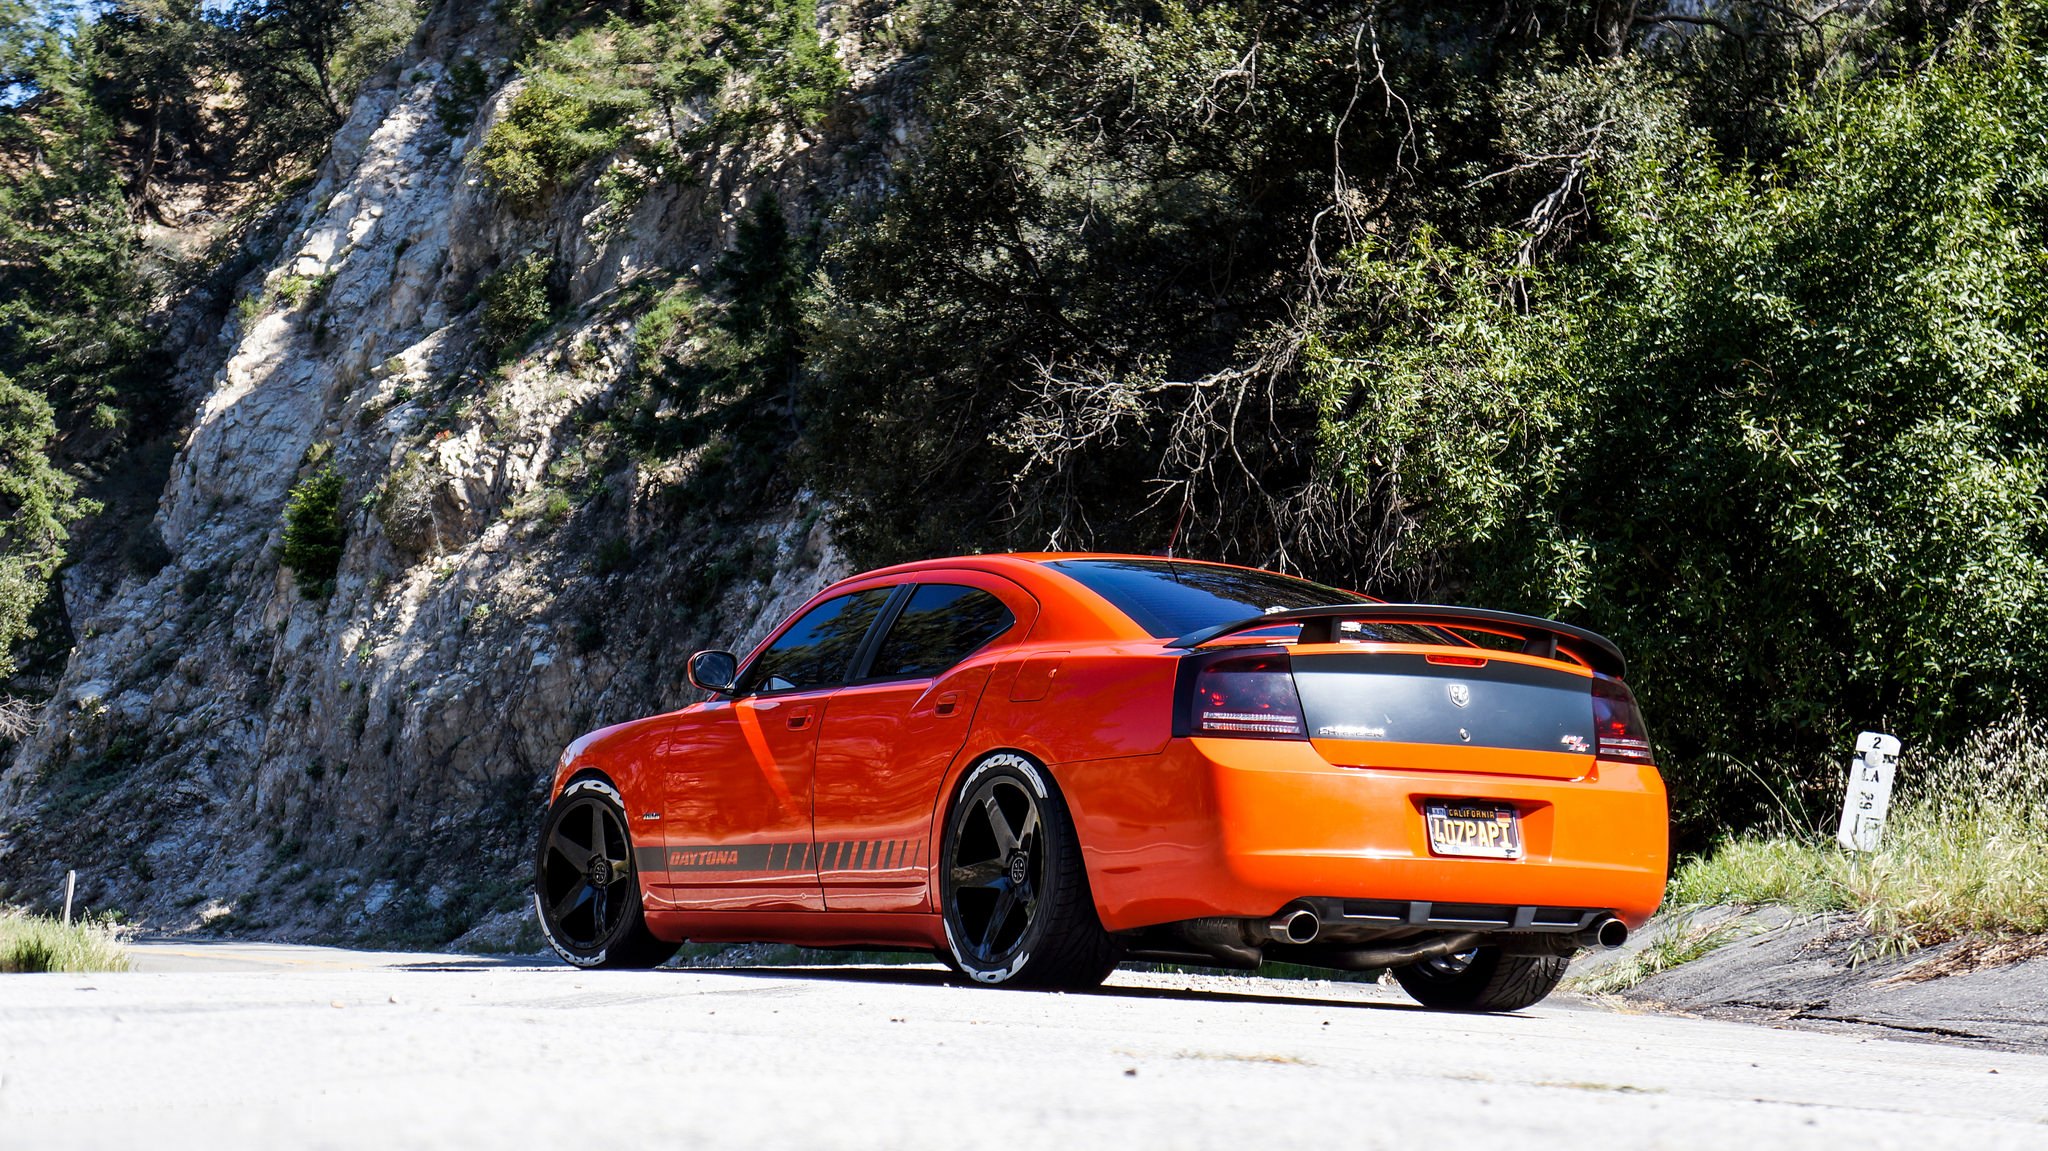 Aftermarket Rear Spoiler on Orange Dodge Charger - Photo by Blaque Diamond Wheels